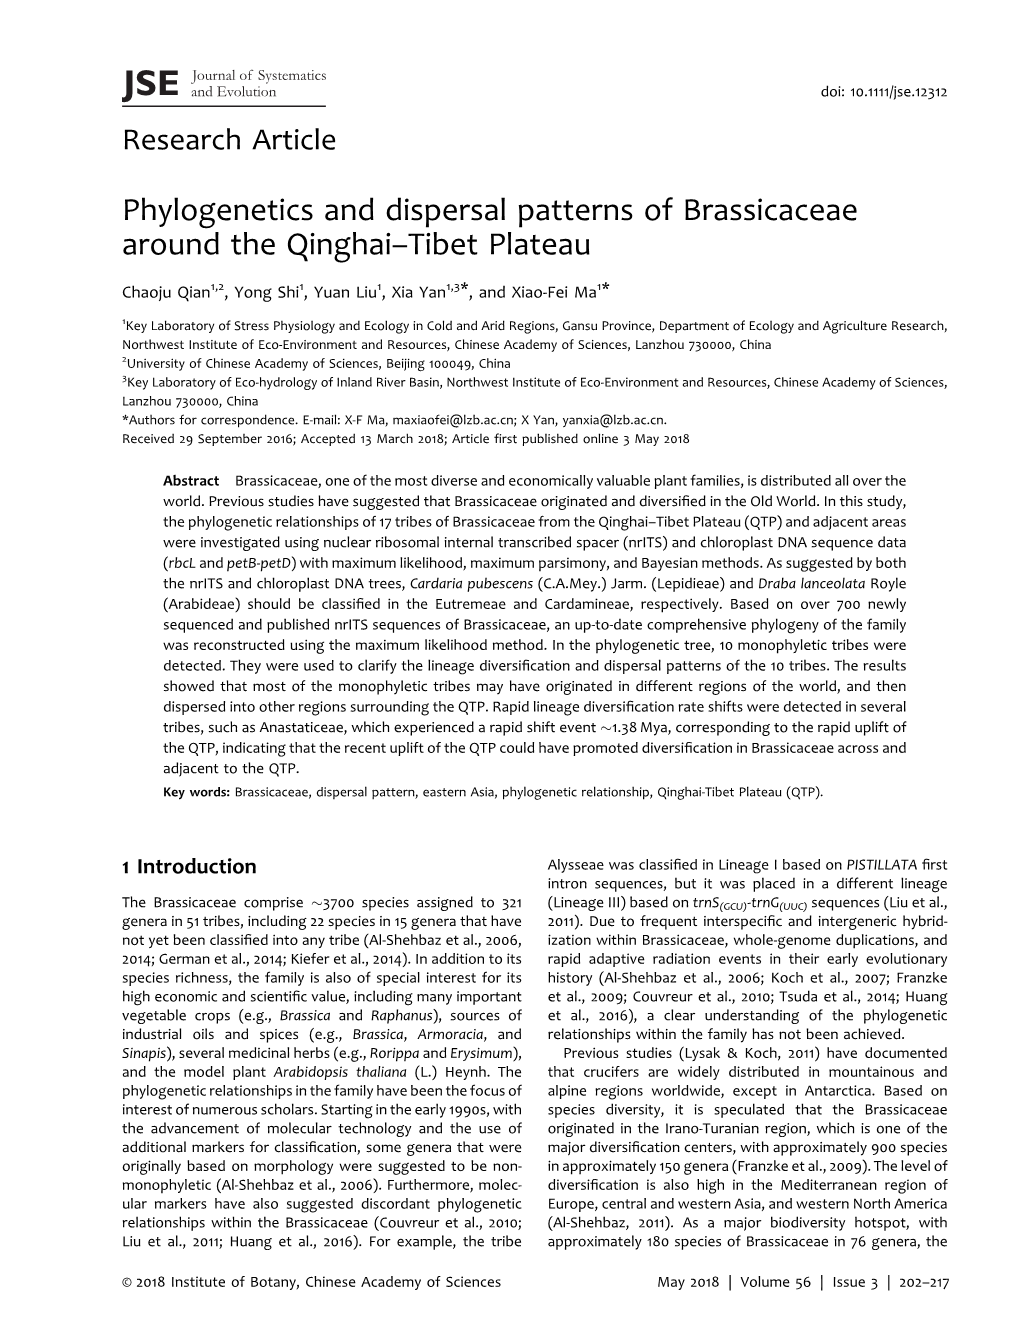 Phylogenetics and Dispersal Patterns of Brassicaceae Around the Qinghai–Tibet Plateau